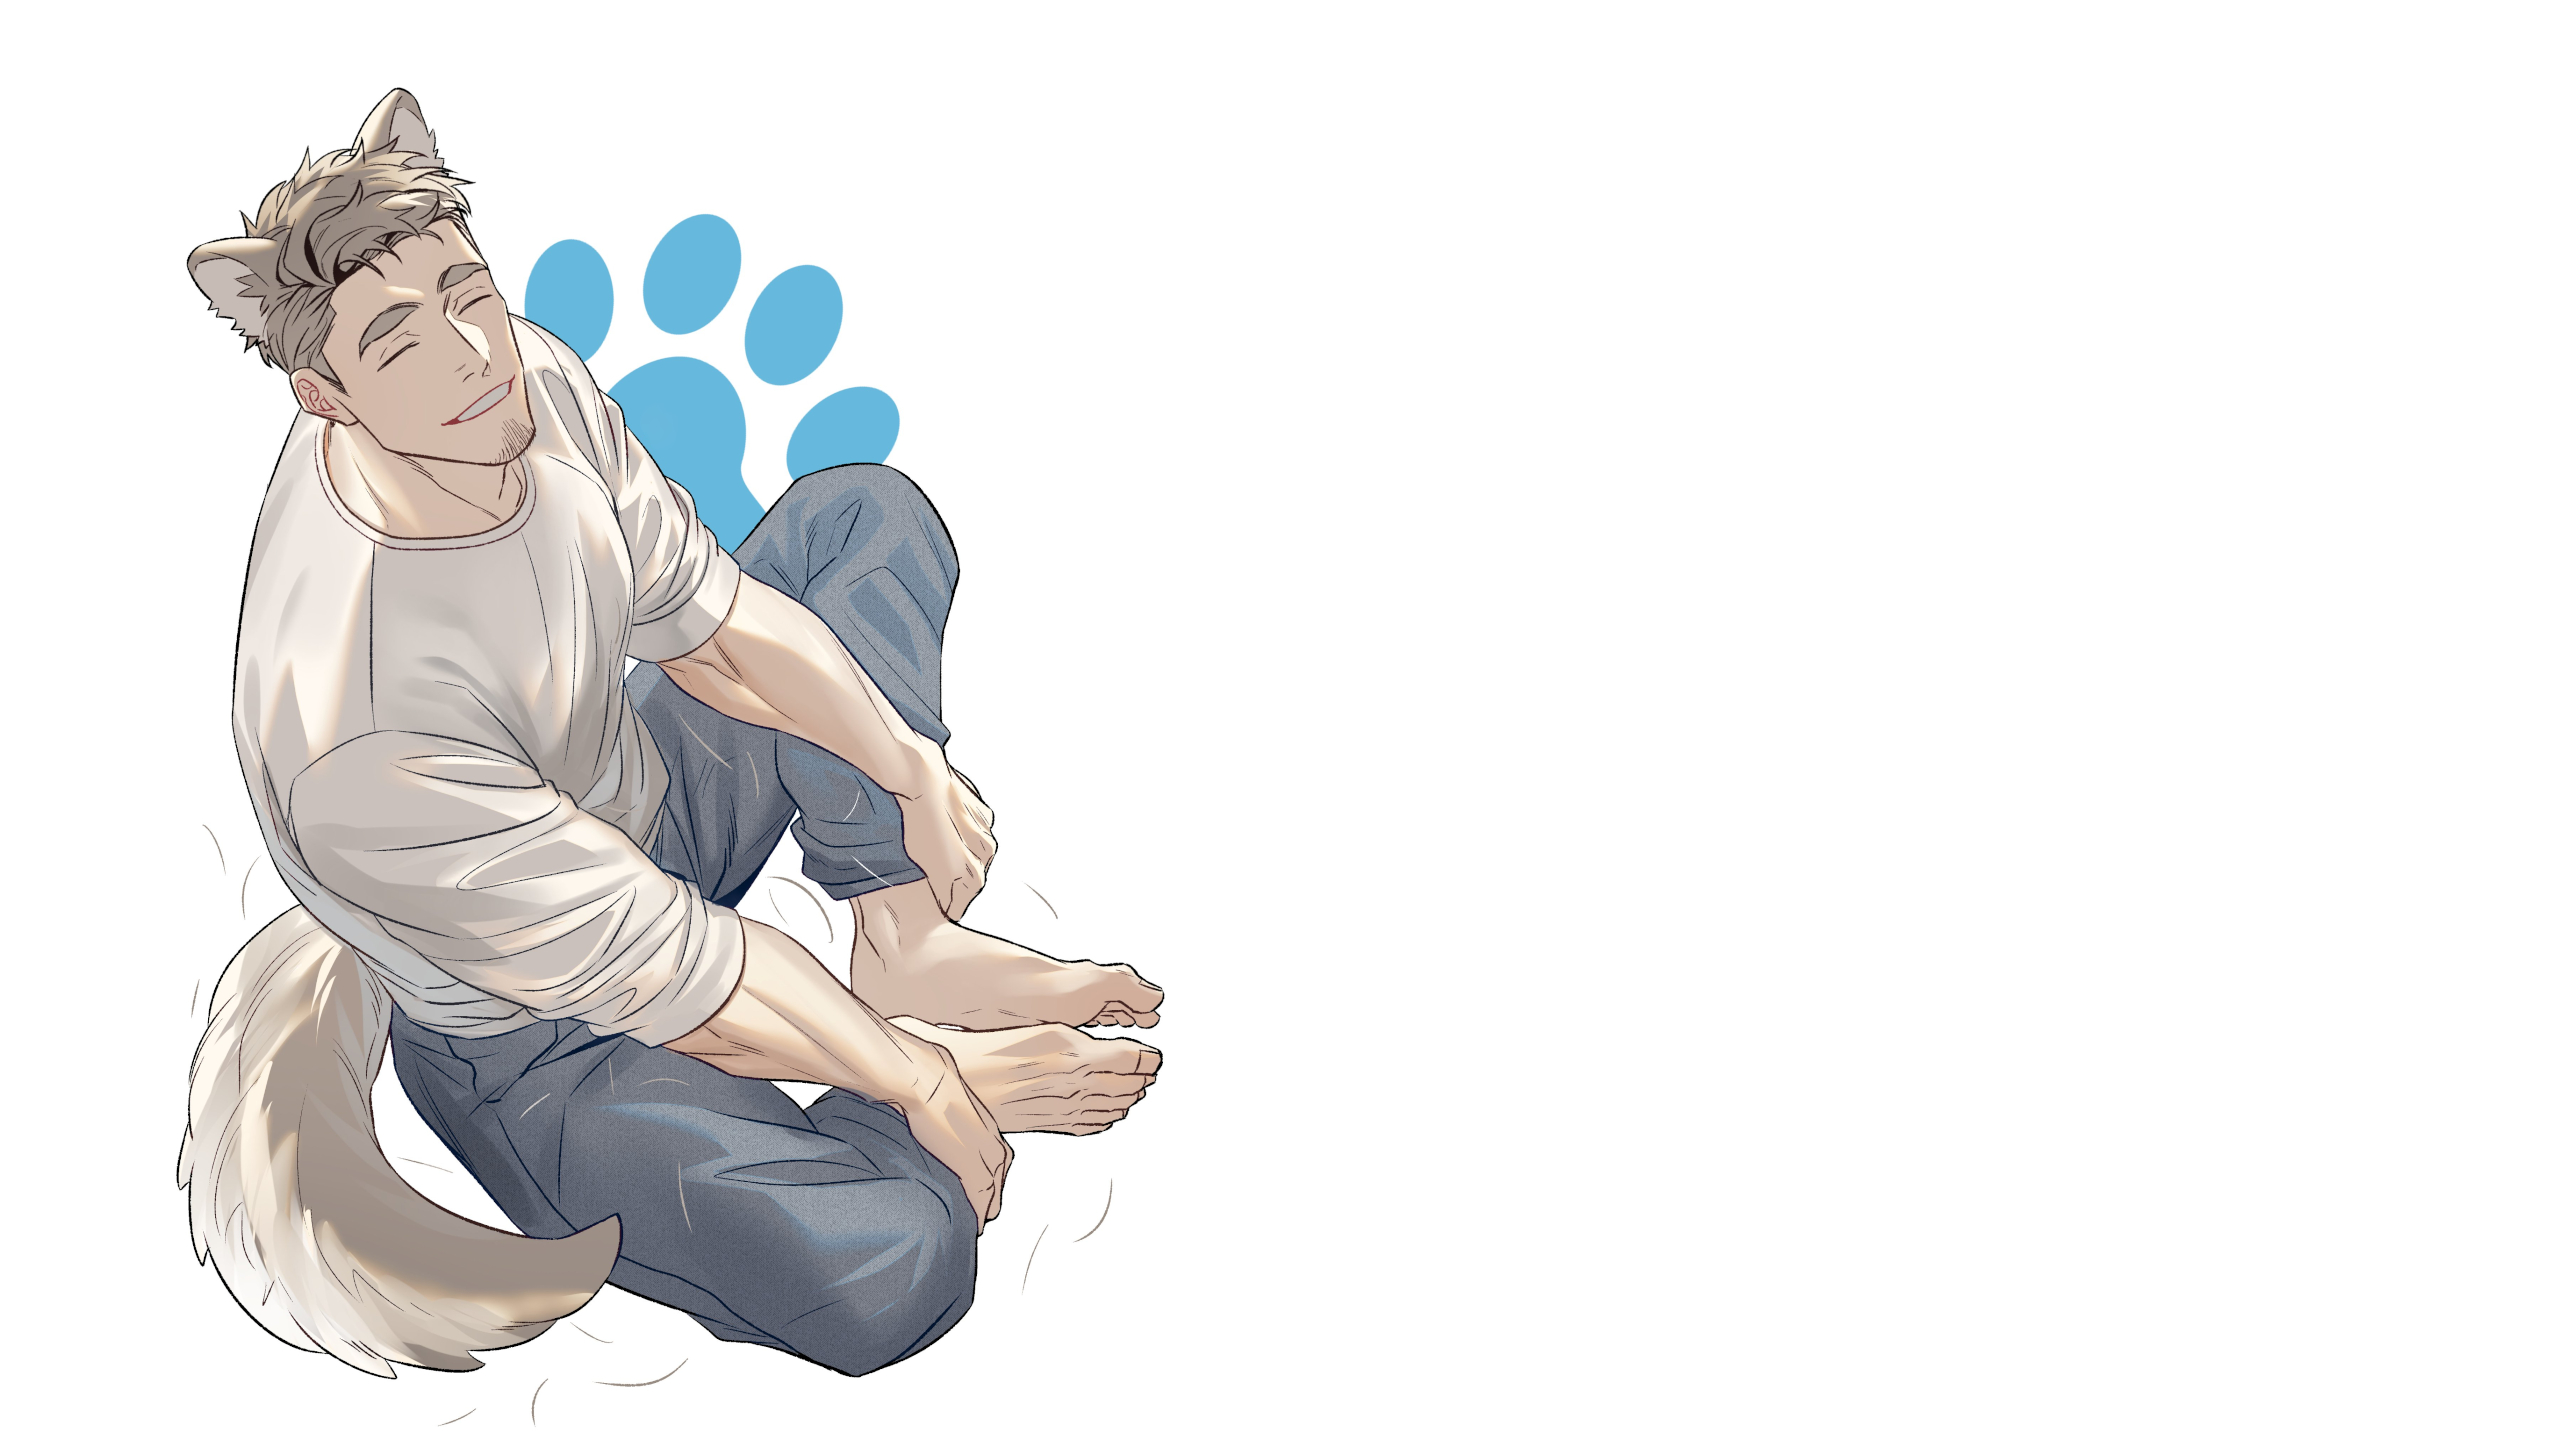 Anime 2560x1440 cat boy white background bara_(genre) anime boys closed eyes parted lips rolled sleeves long sleeves barefoot bent legs simple background beard cat ears cat tail thick eyebrows smiling holding ankles sitting